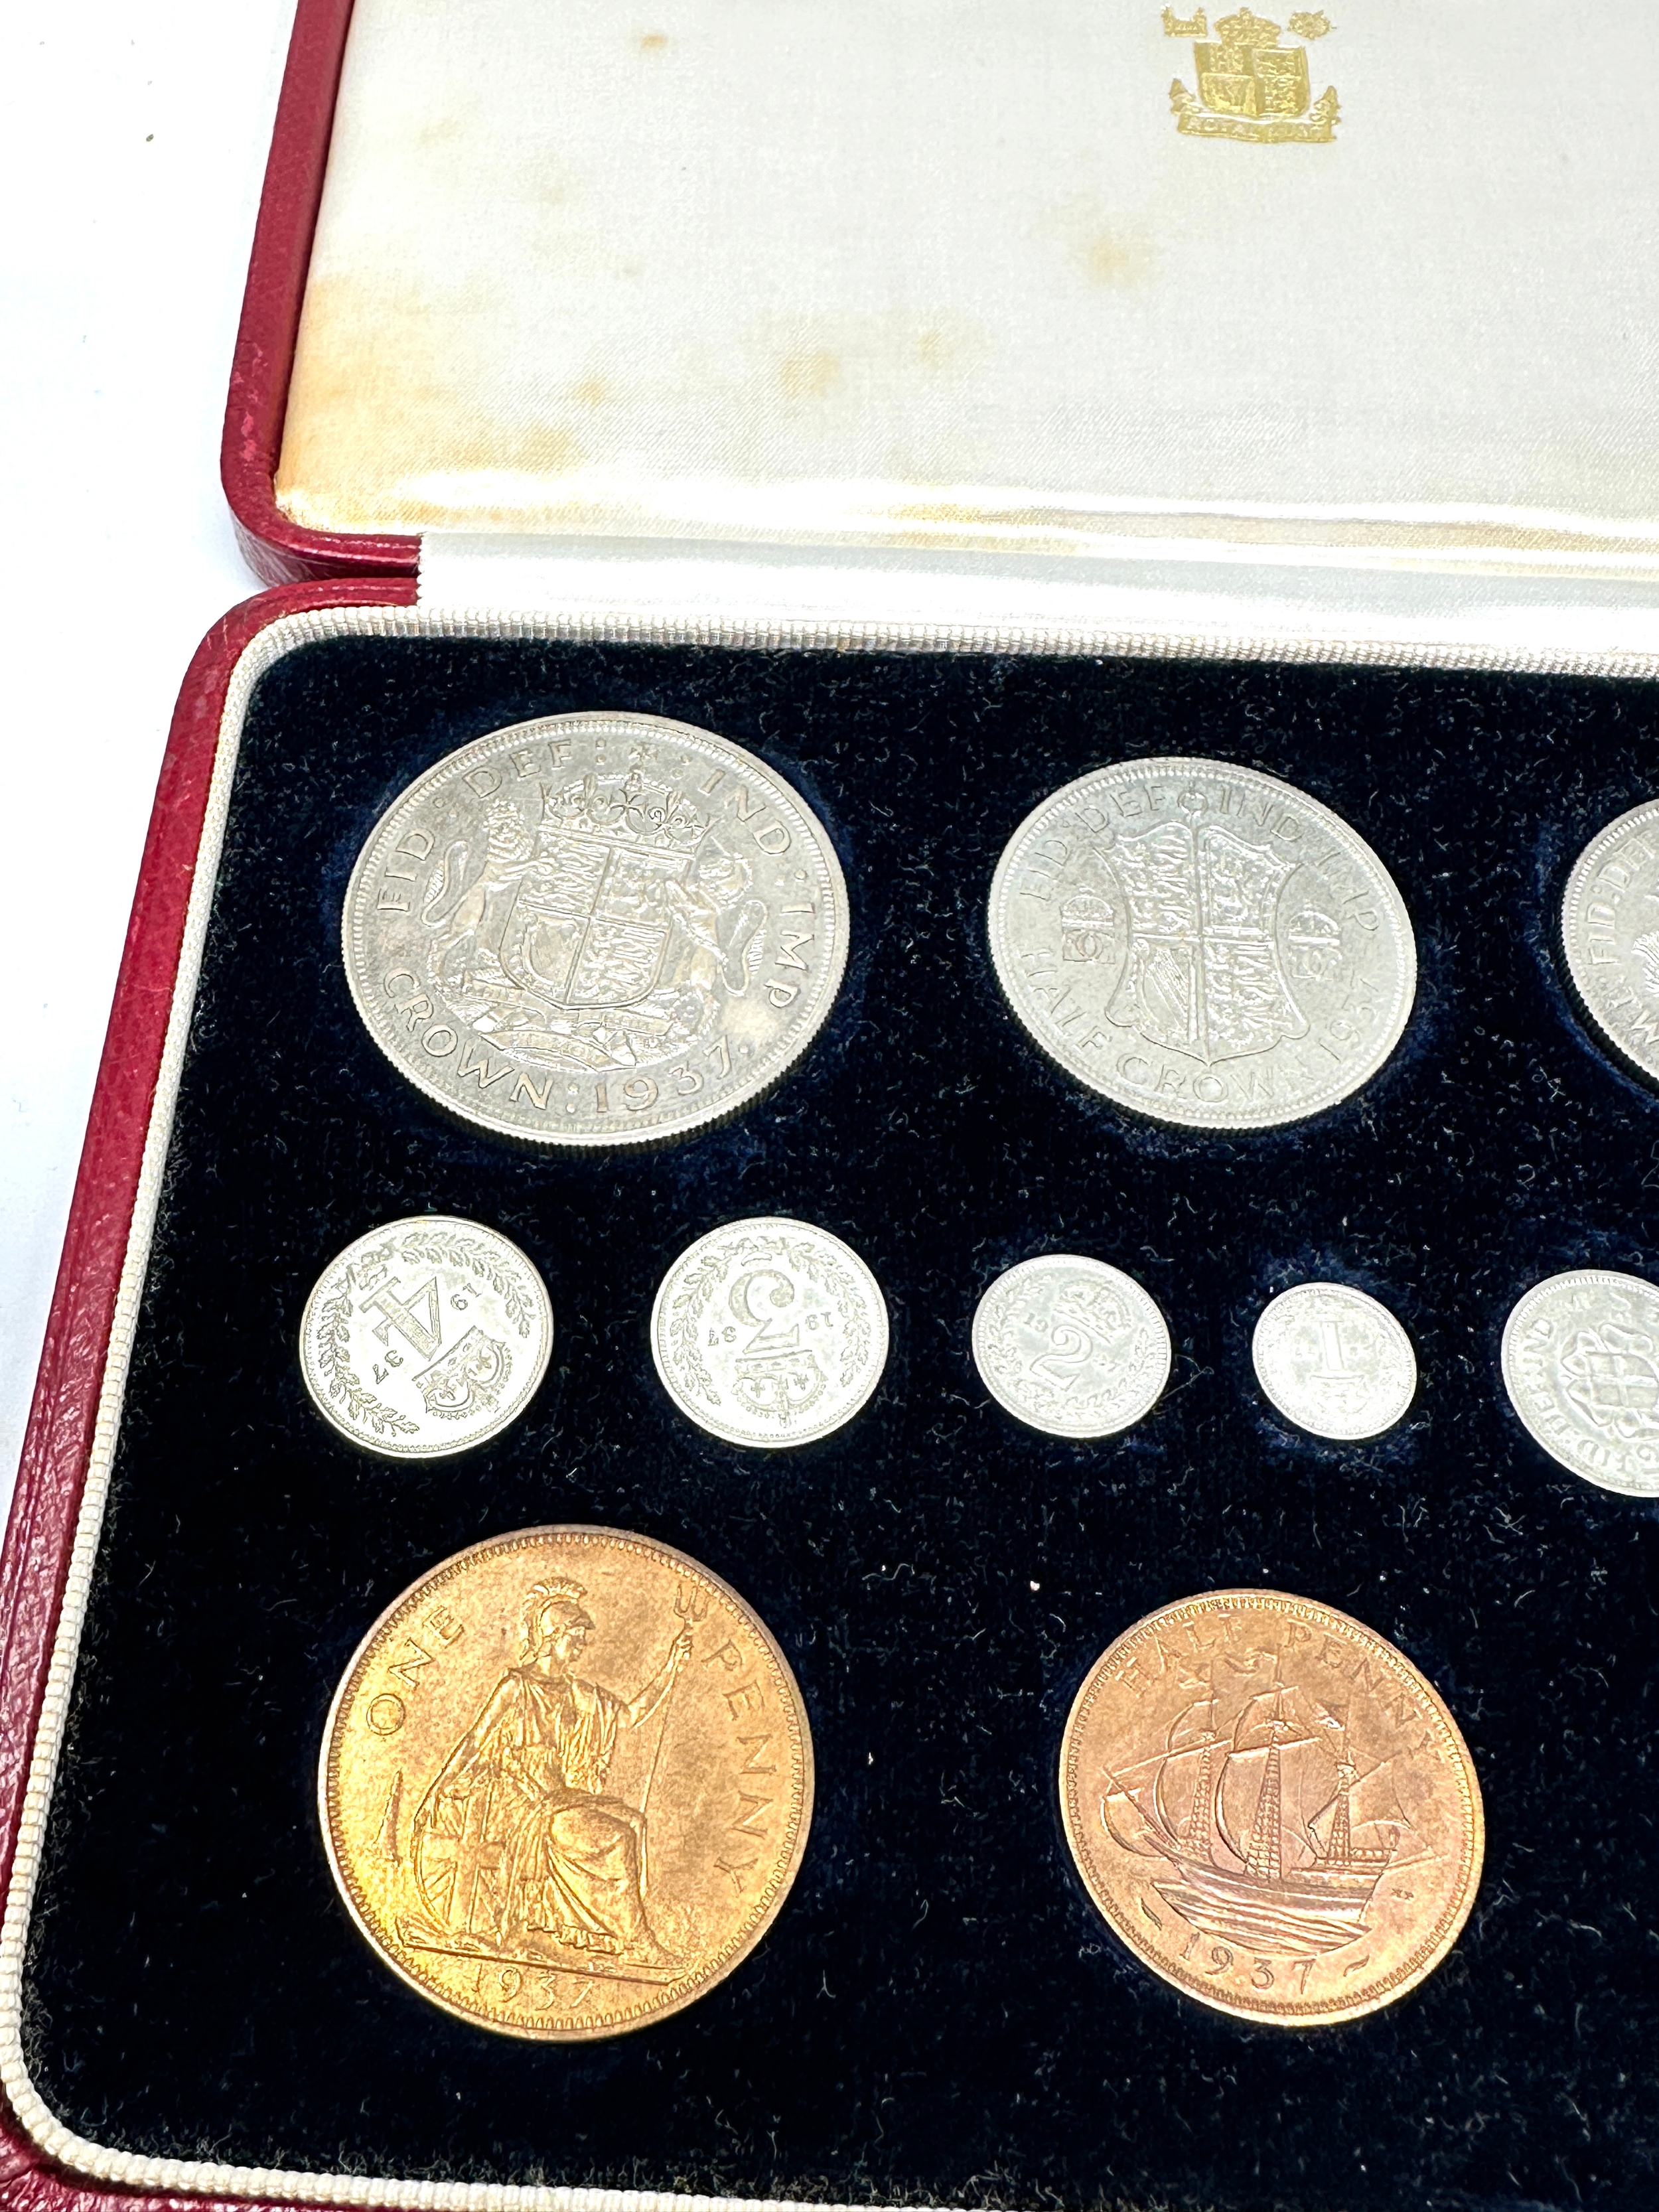 Silver Specimen 1937 15 Coin Set Crown - Farthing & Maundy Money original boxed set in unc condition - Image 2 of 4